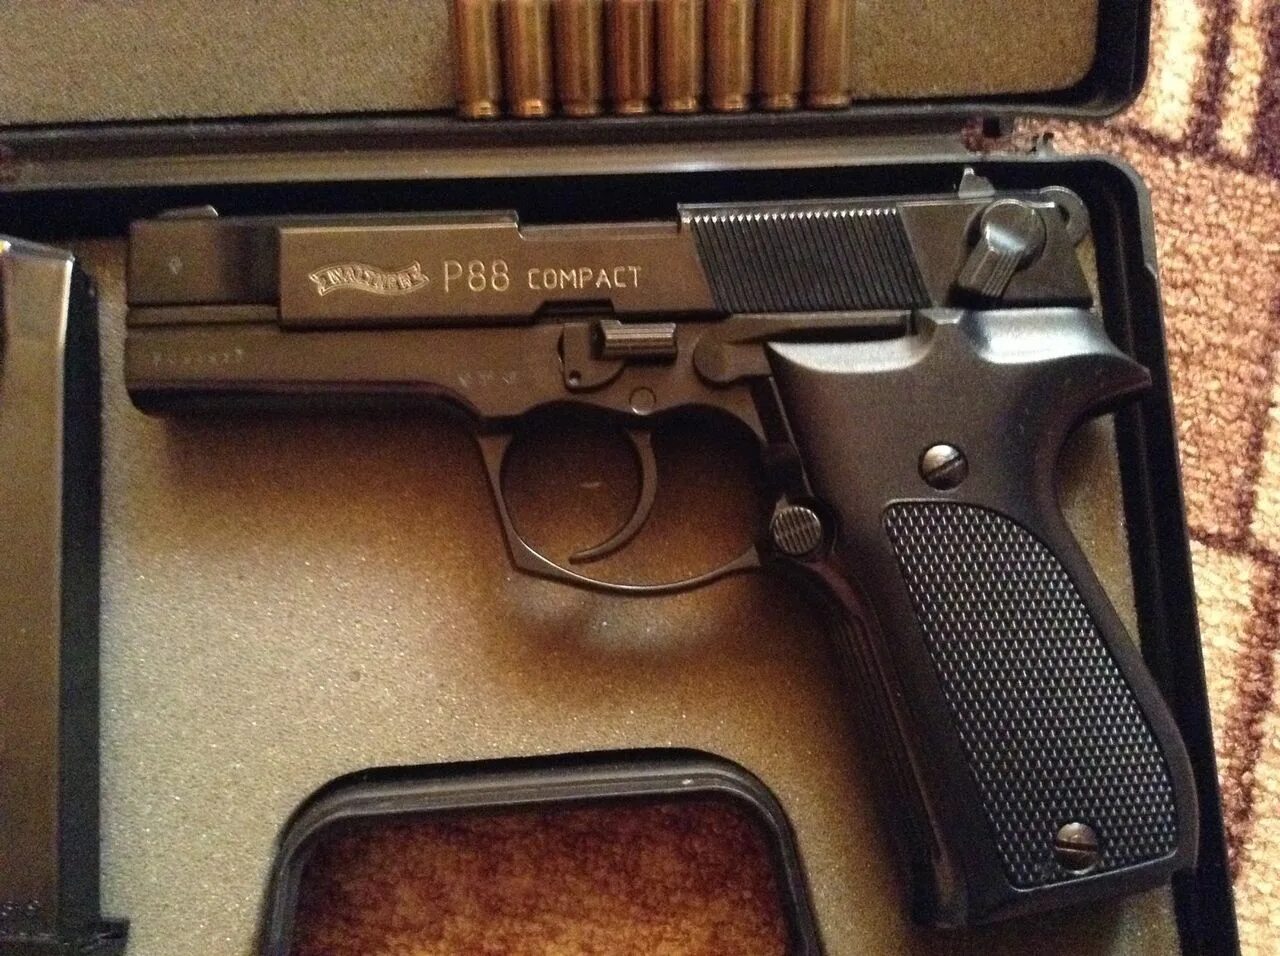 Walther p88 Compact.